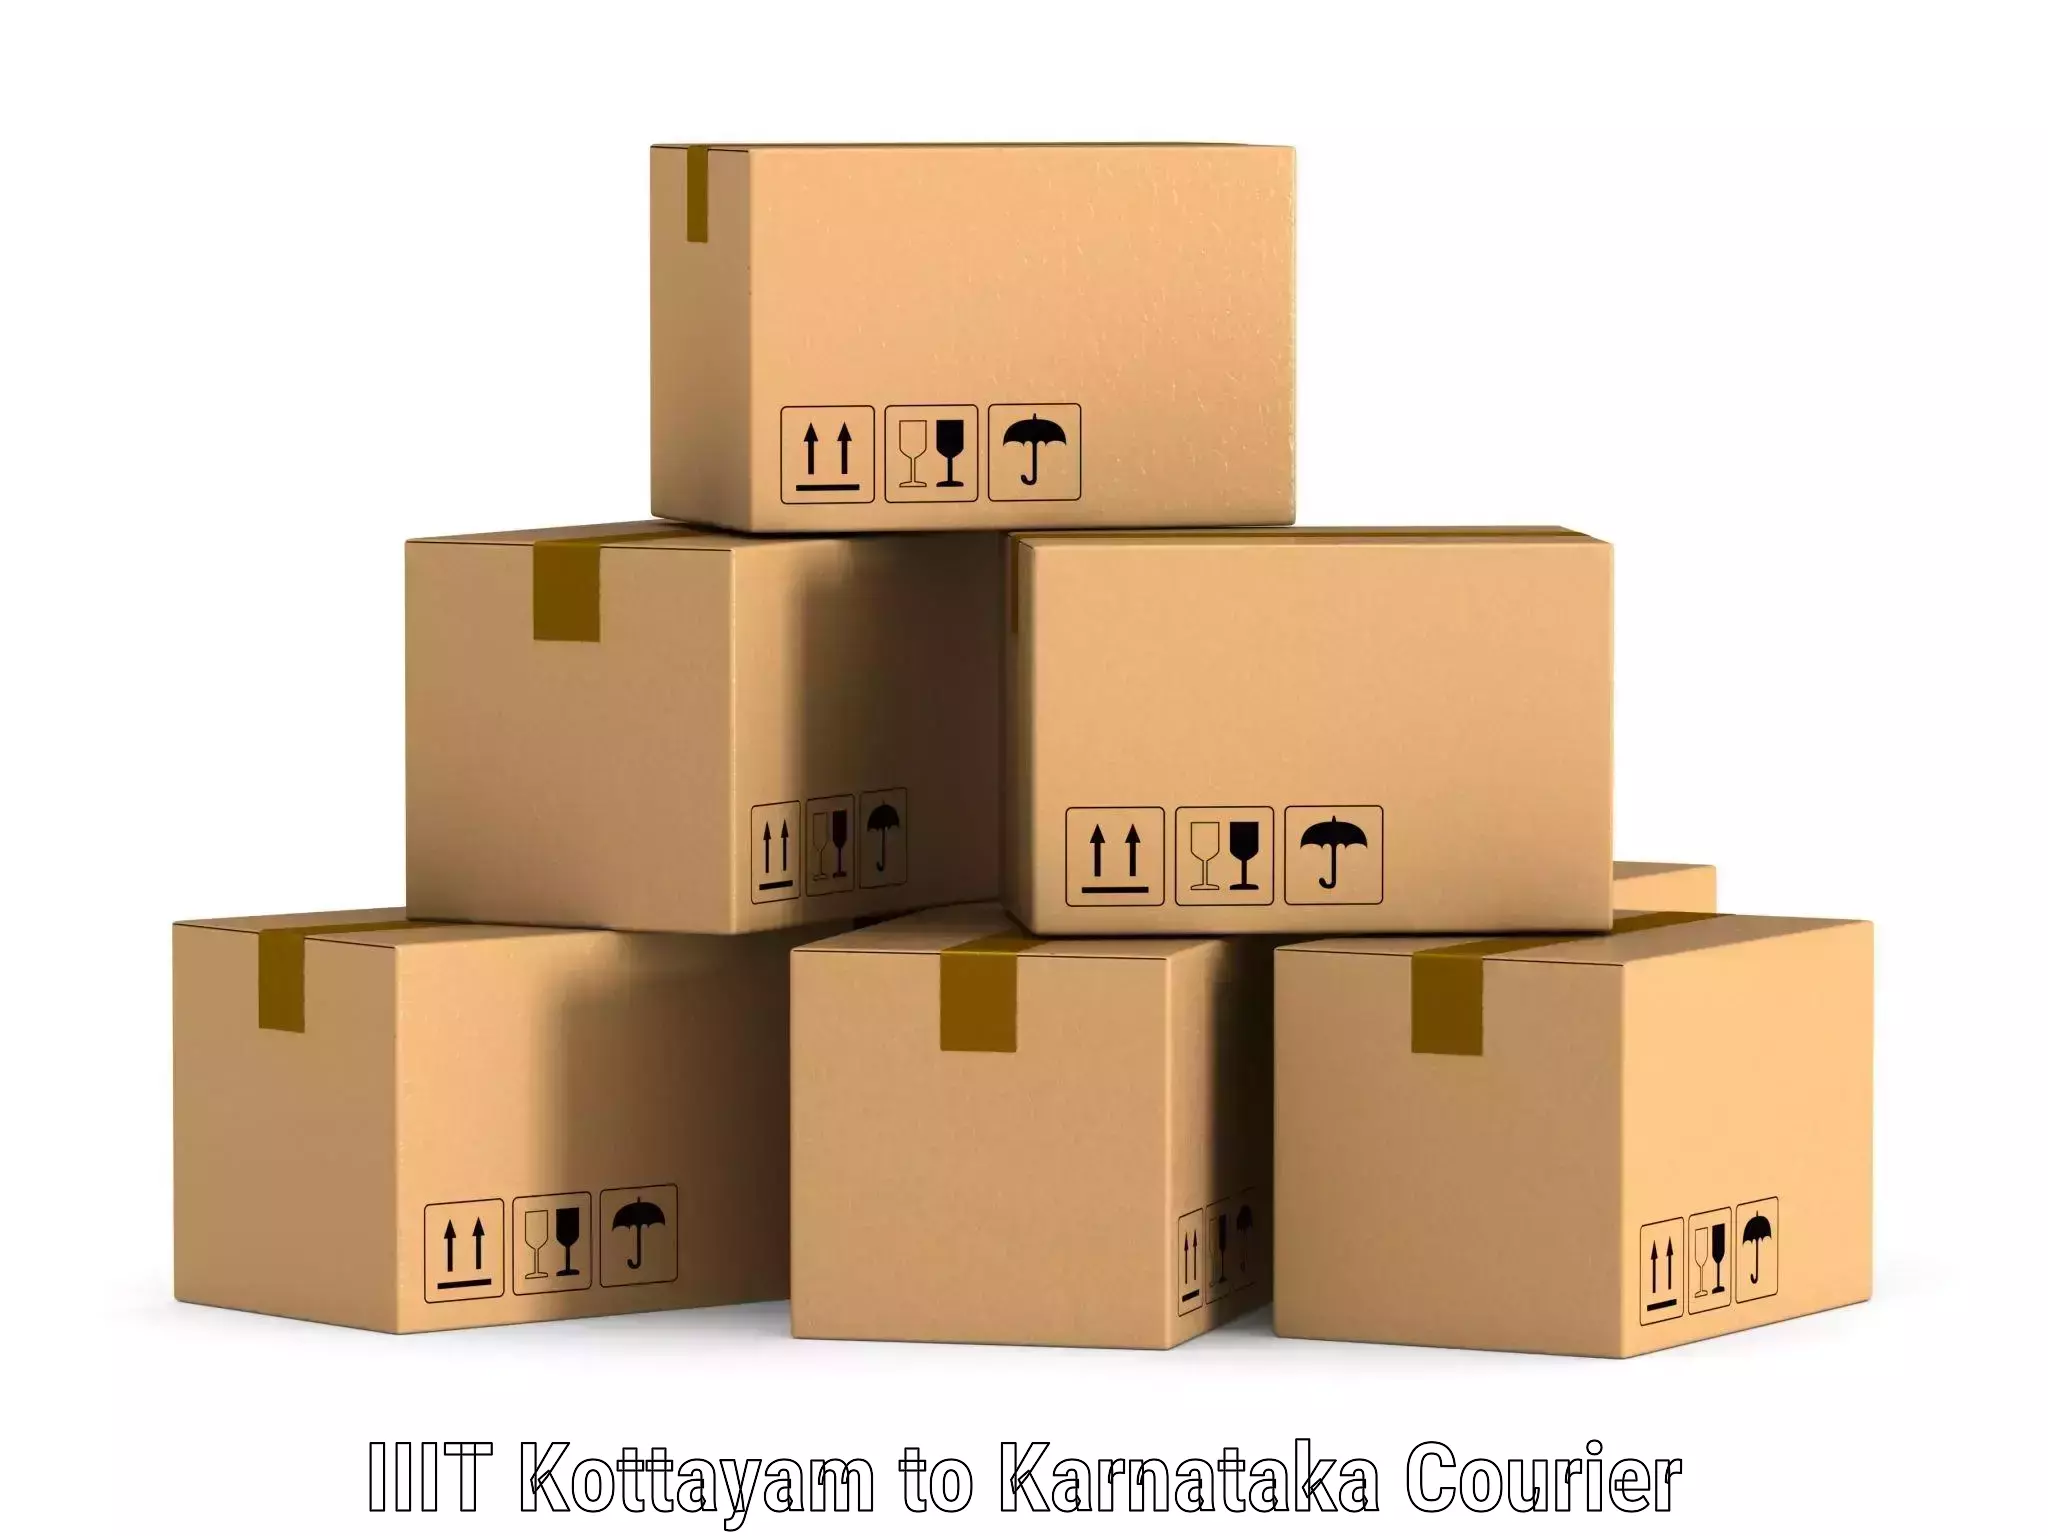 Express logistics service IIIT Kottayam to Manipal Academy of Higher Education